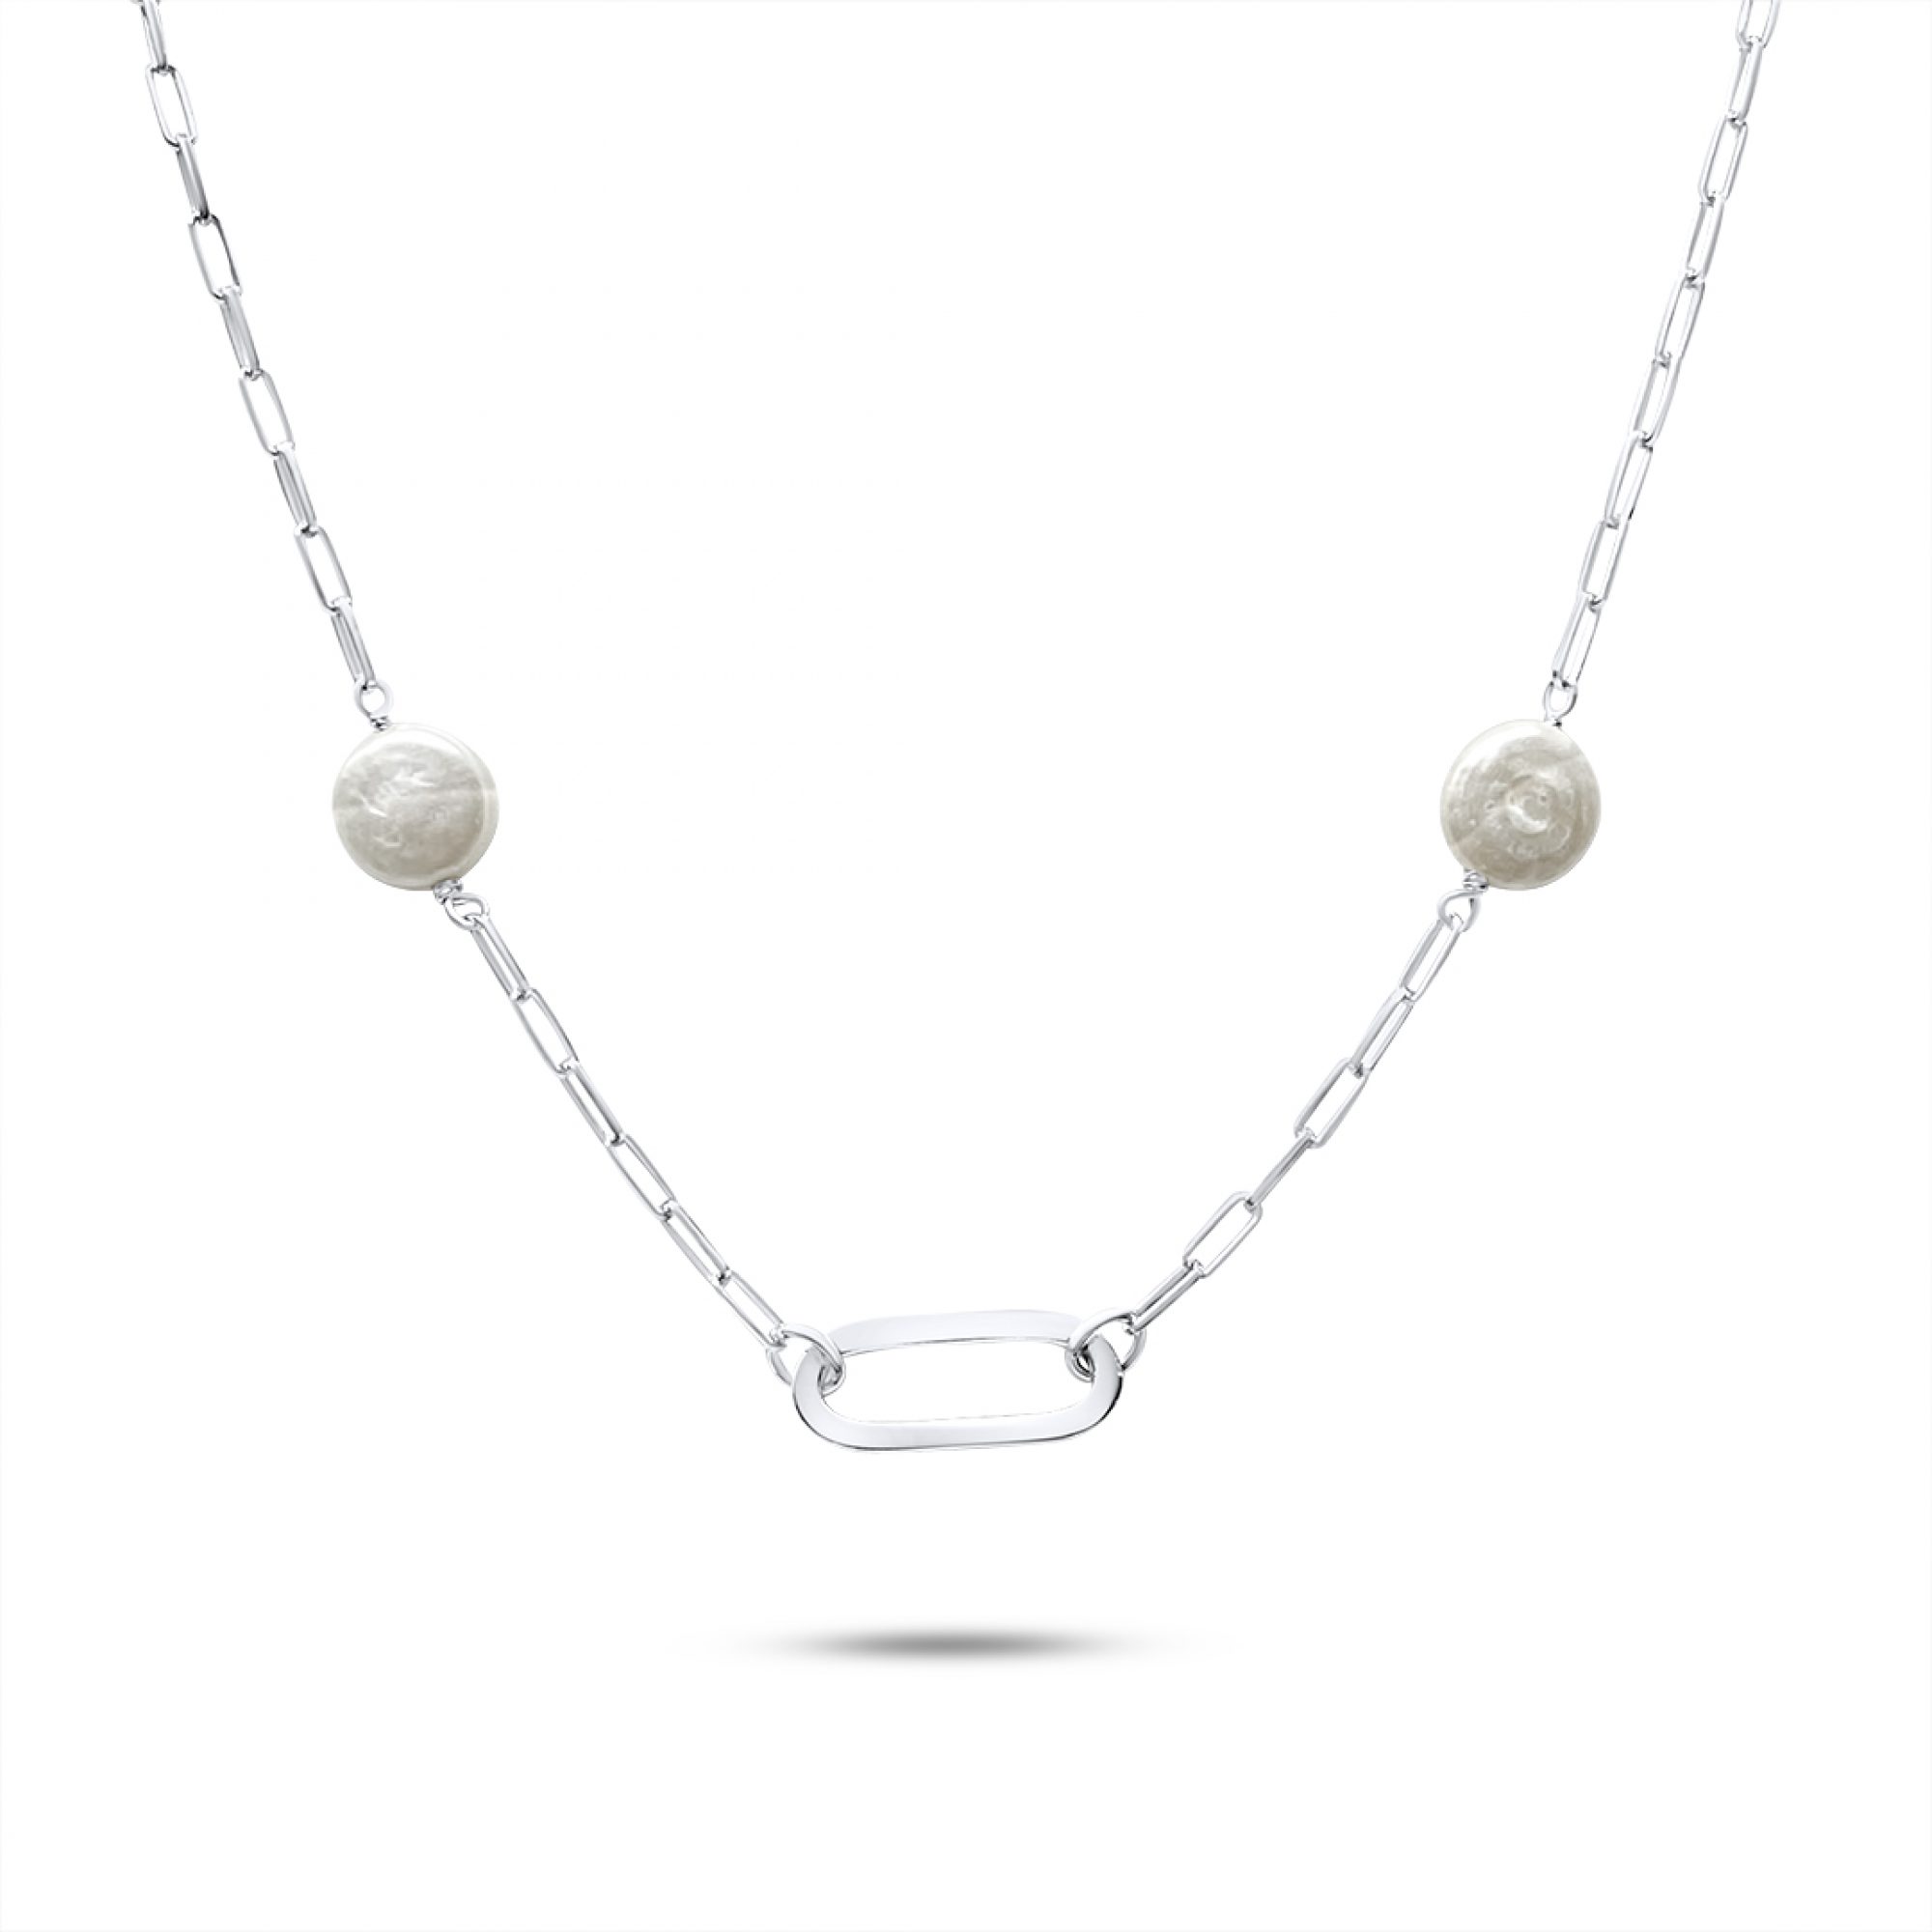 Chain necklace with mother of pearl